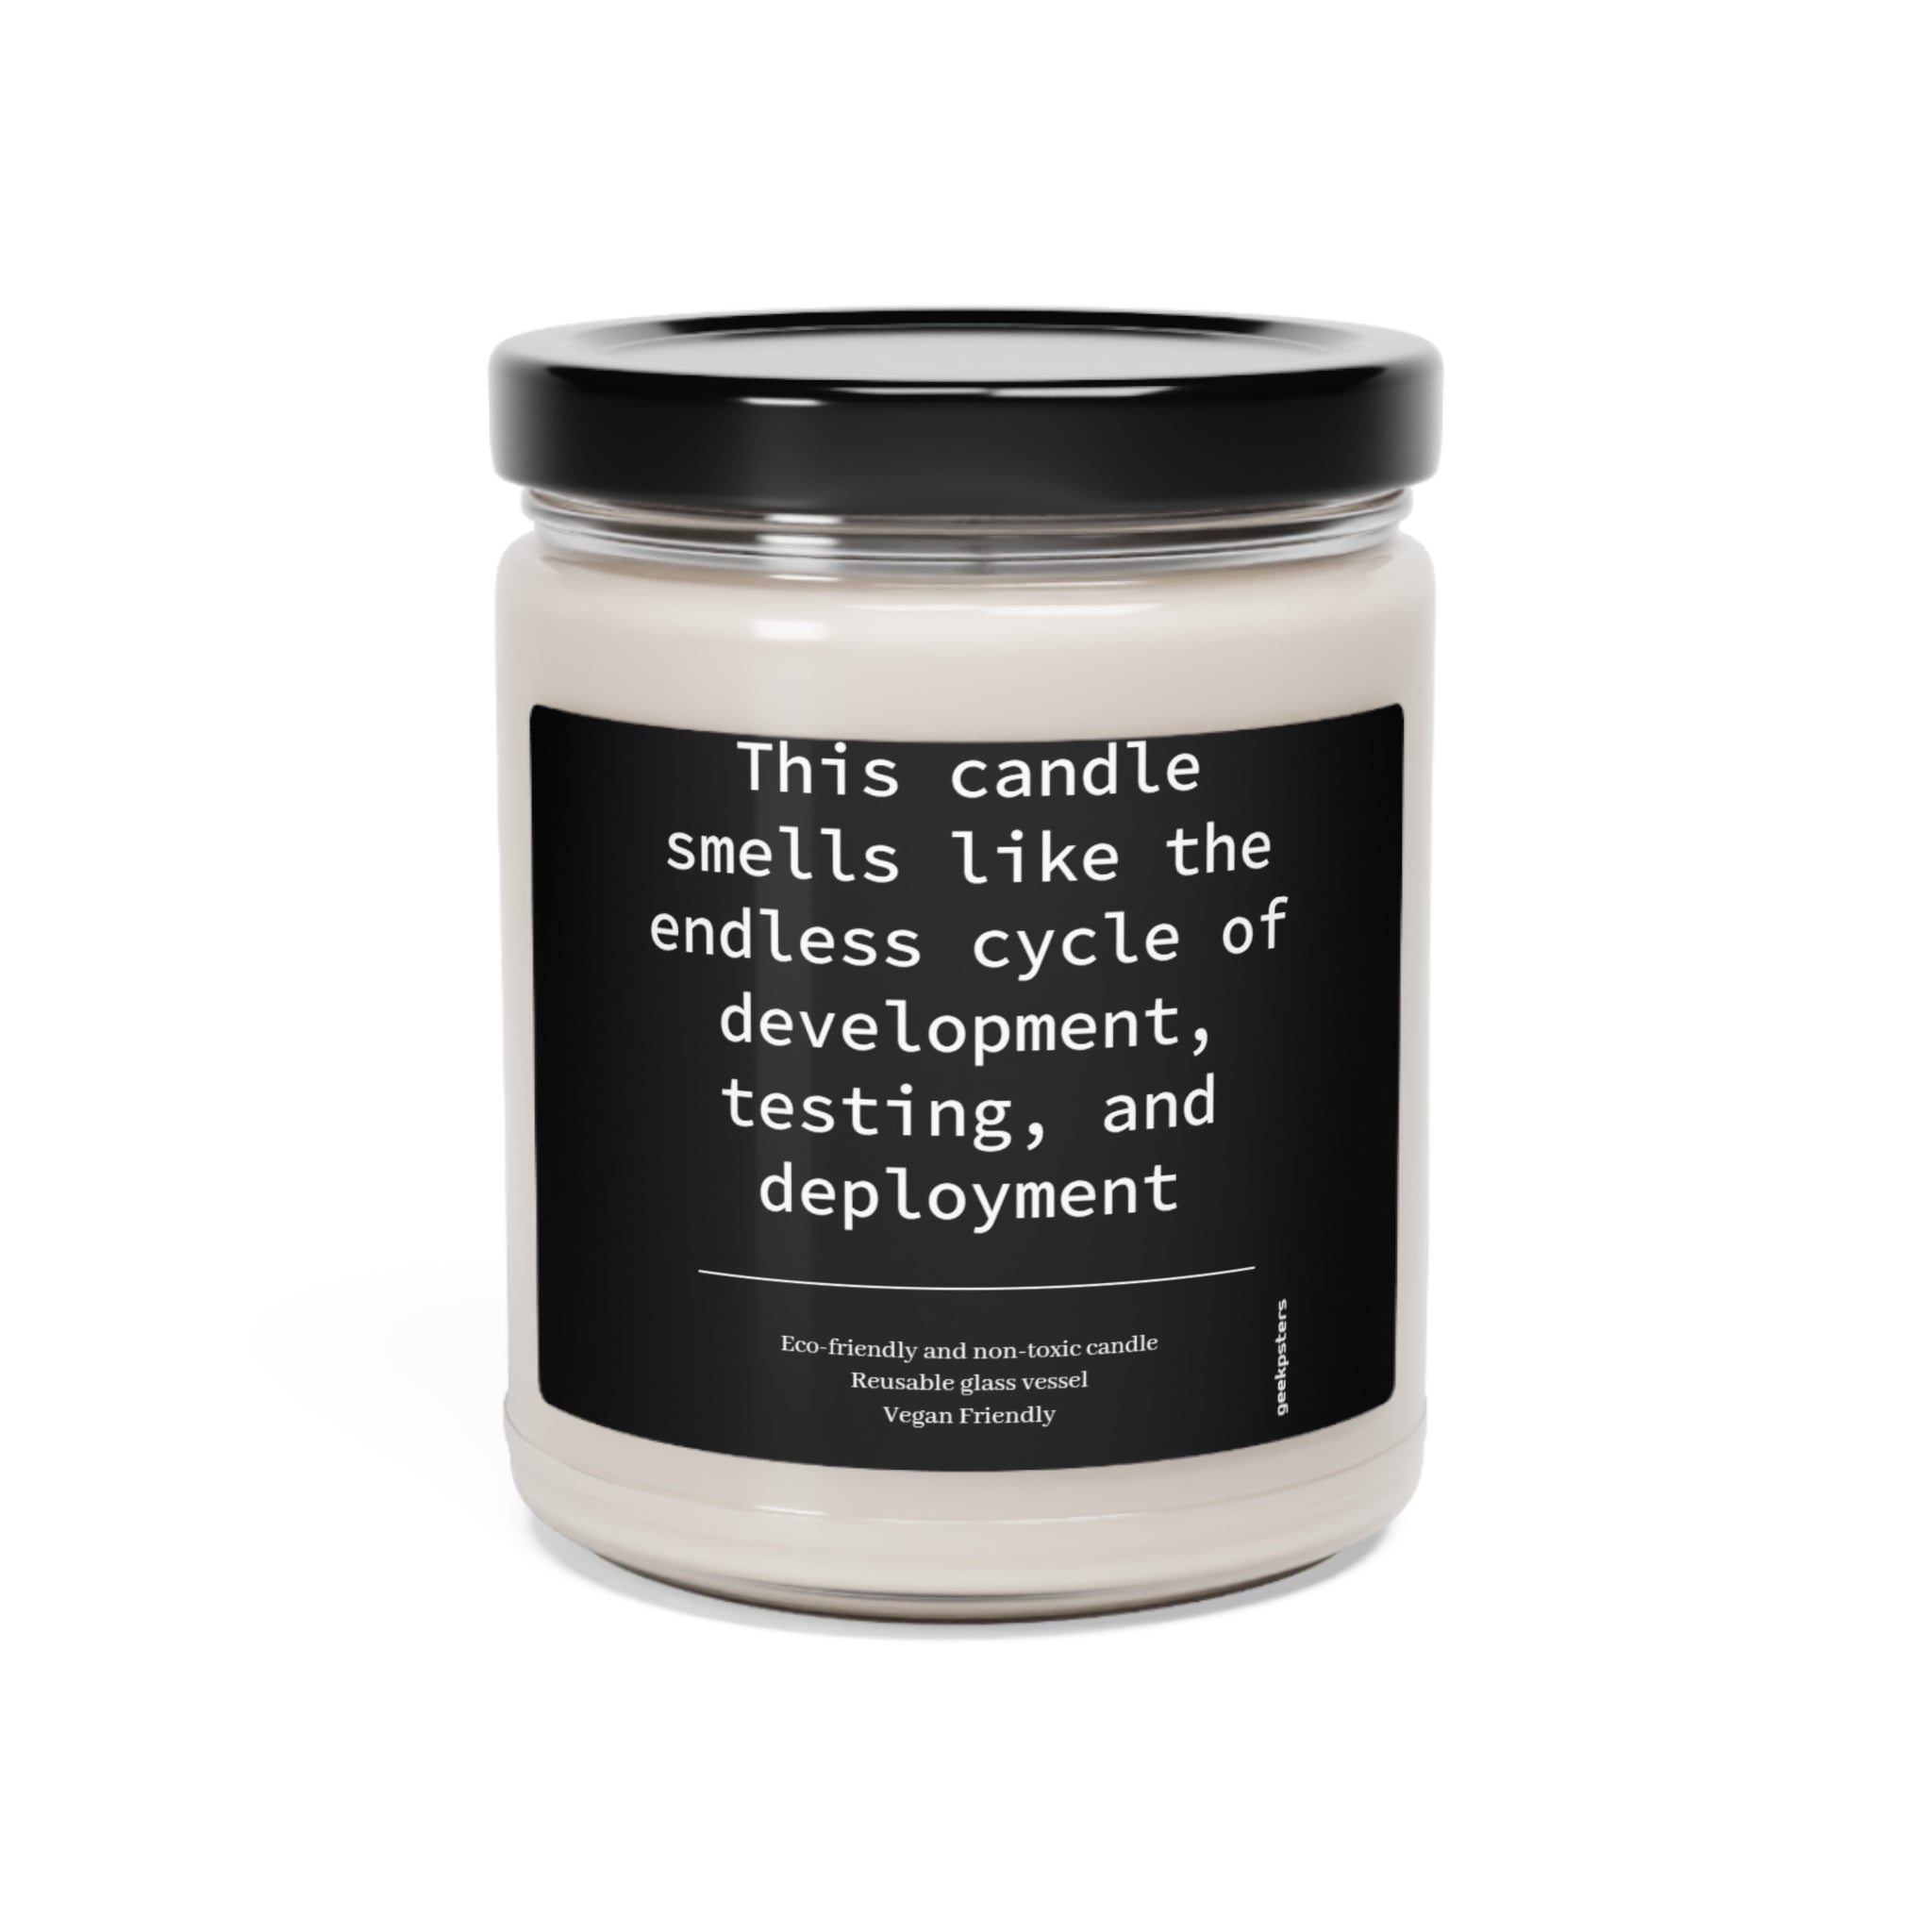 A scented soy candle in a clear jar with a label that reads "this candle smells like the endless cycle of software development, testing, and deployment." Eco-friendly and vegan-friendly details are also noted.